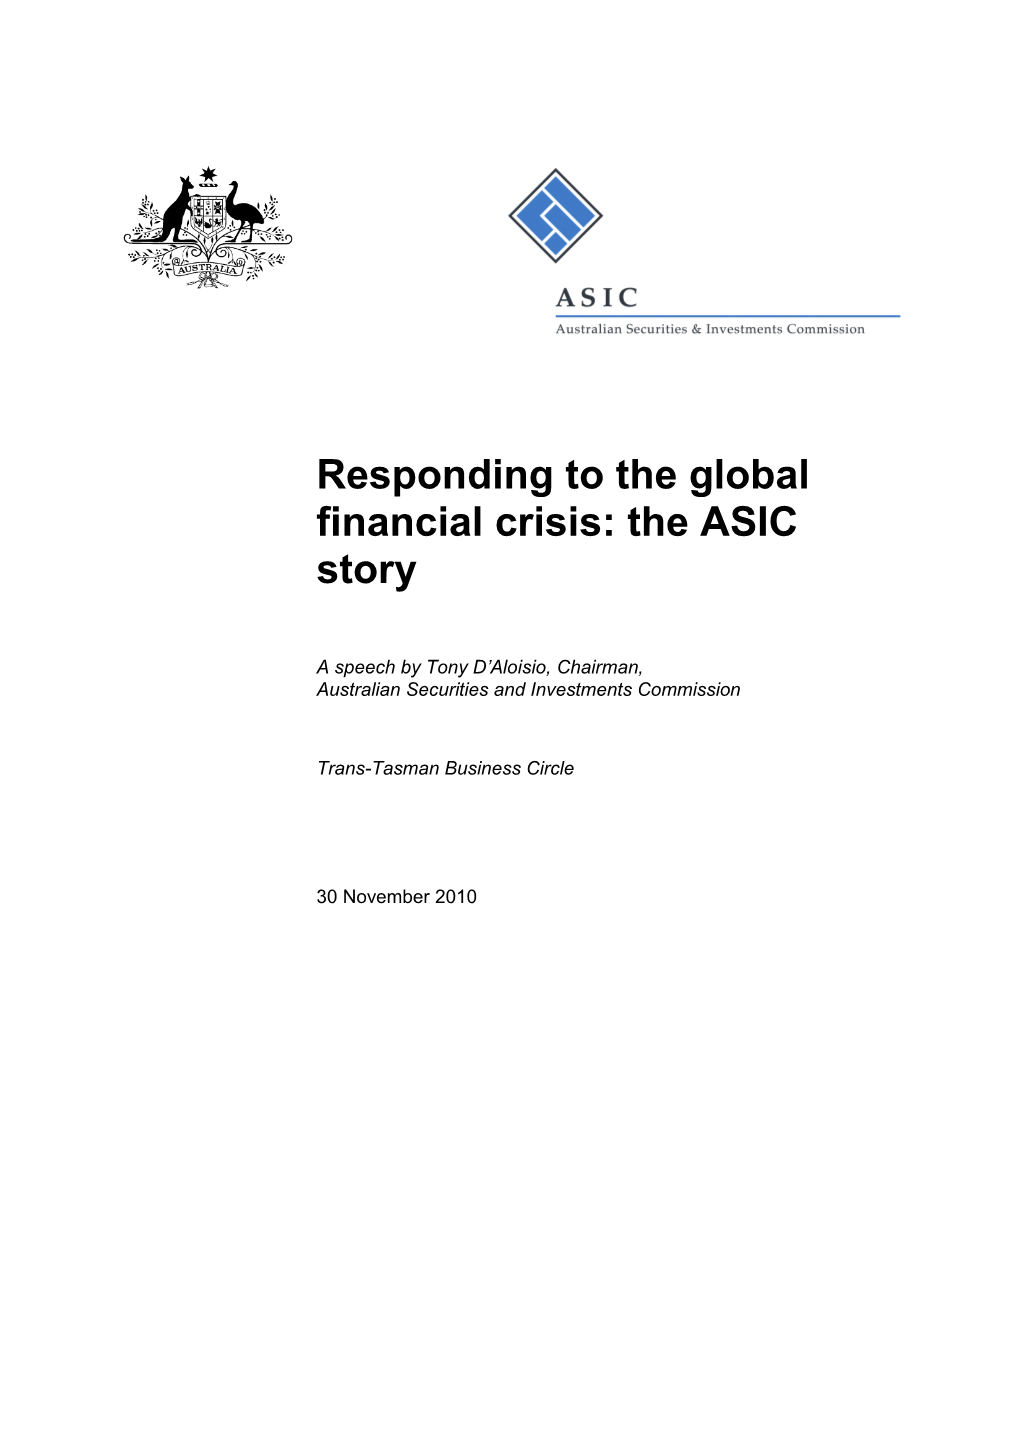 Responding to the Global Financial Crisis: the ASIC Story